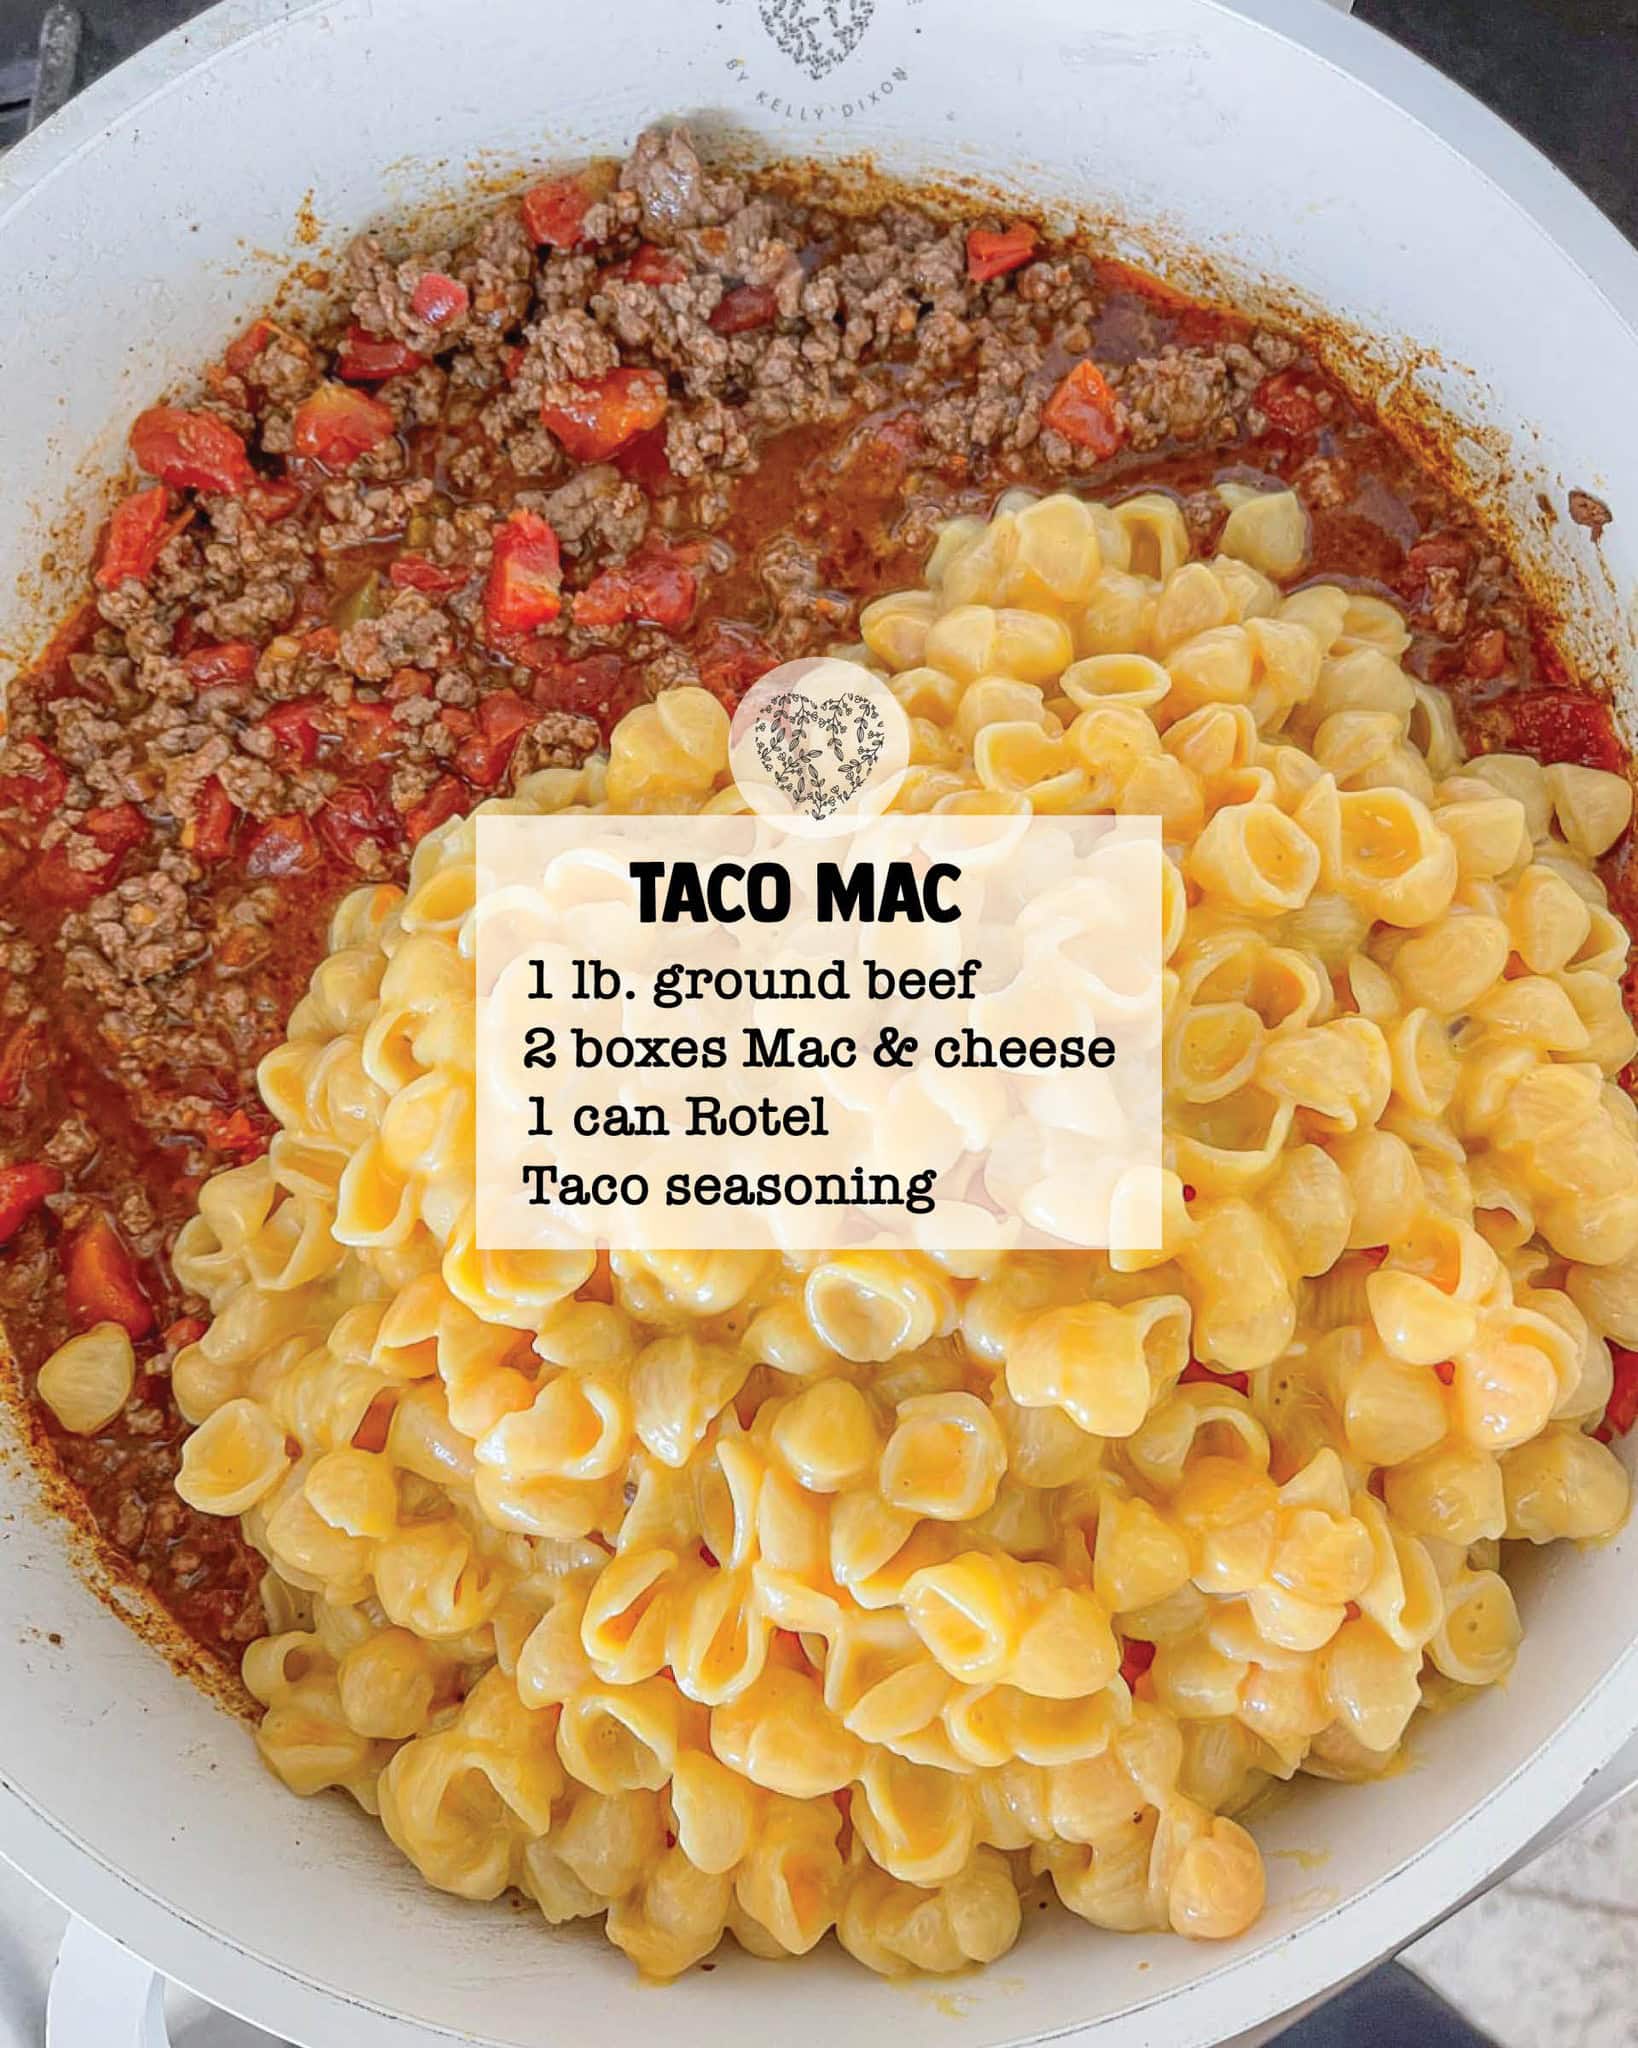 A skillet filled with a dish perfect for busy families, consisting of macaroni and cheese mixed with ground beef, diced tomatoes, and a sprinkle of taco seasoning. A recipe overlay lists the ingredients.